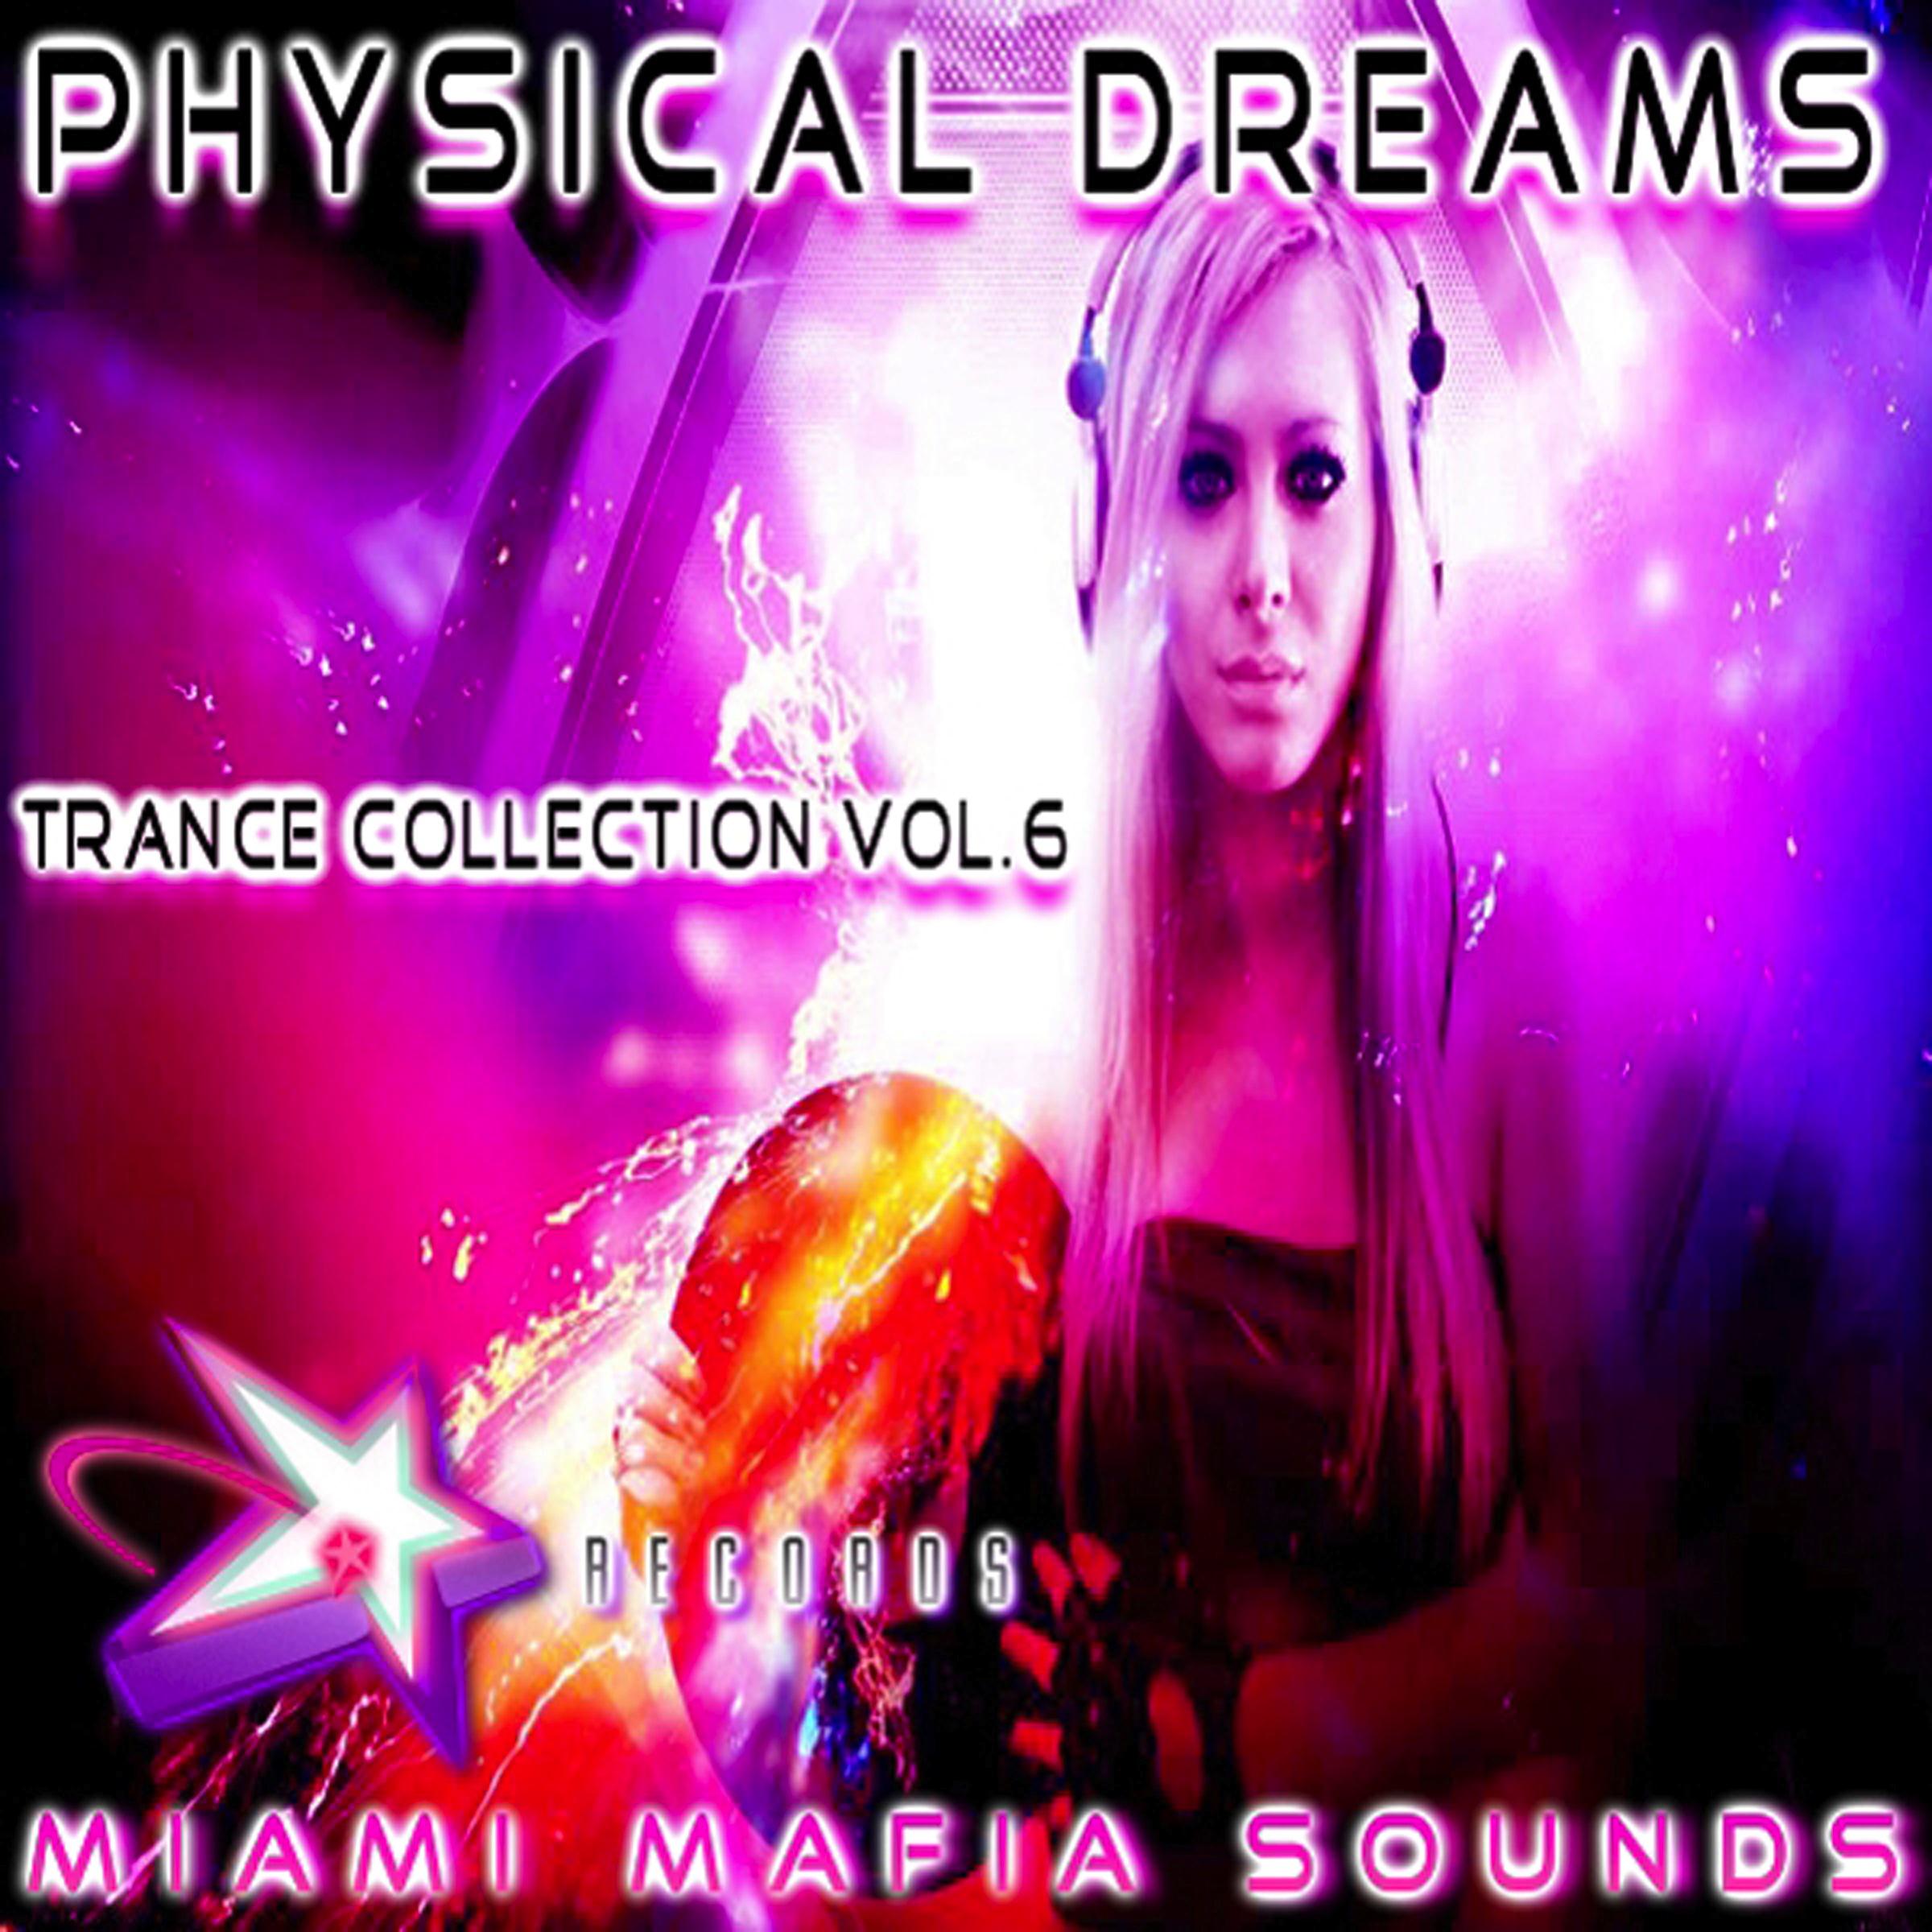 Physical Dreams Trance Collection, Vol. 6